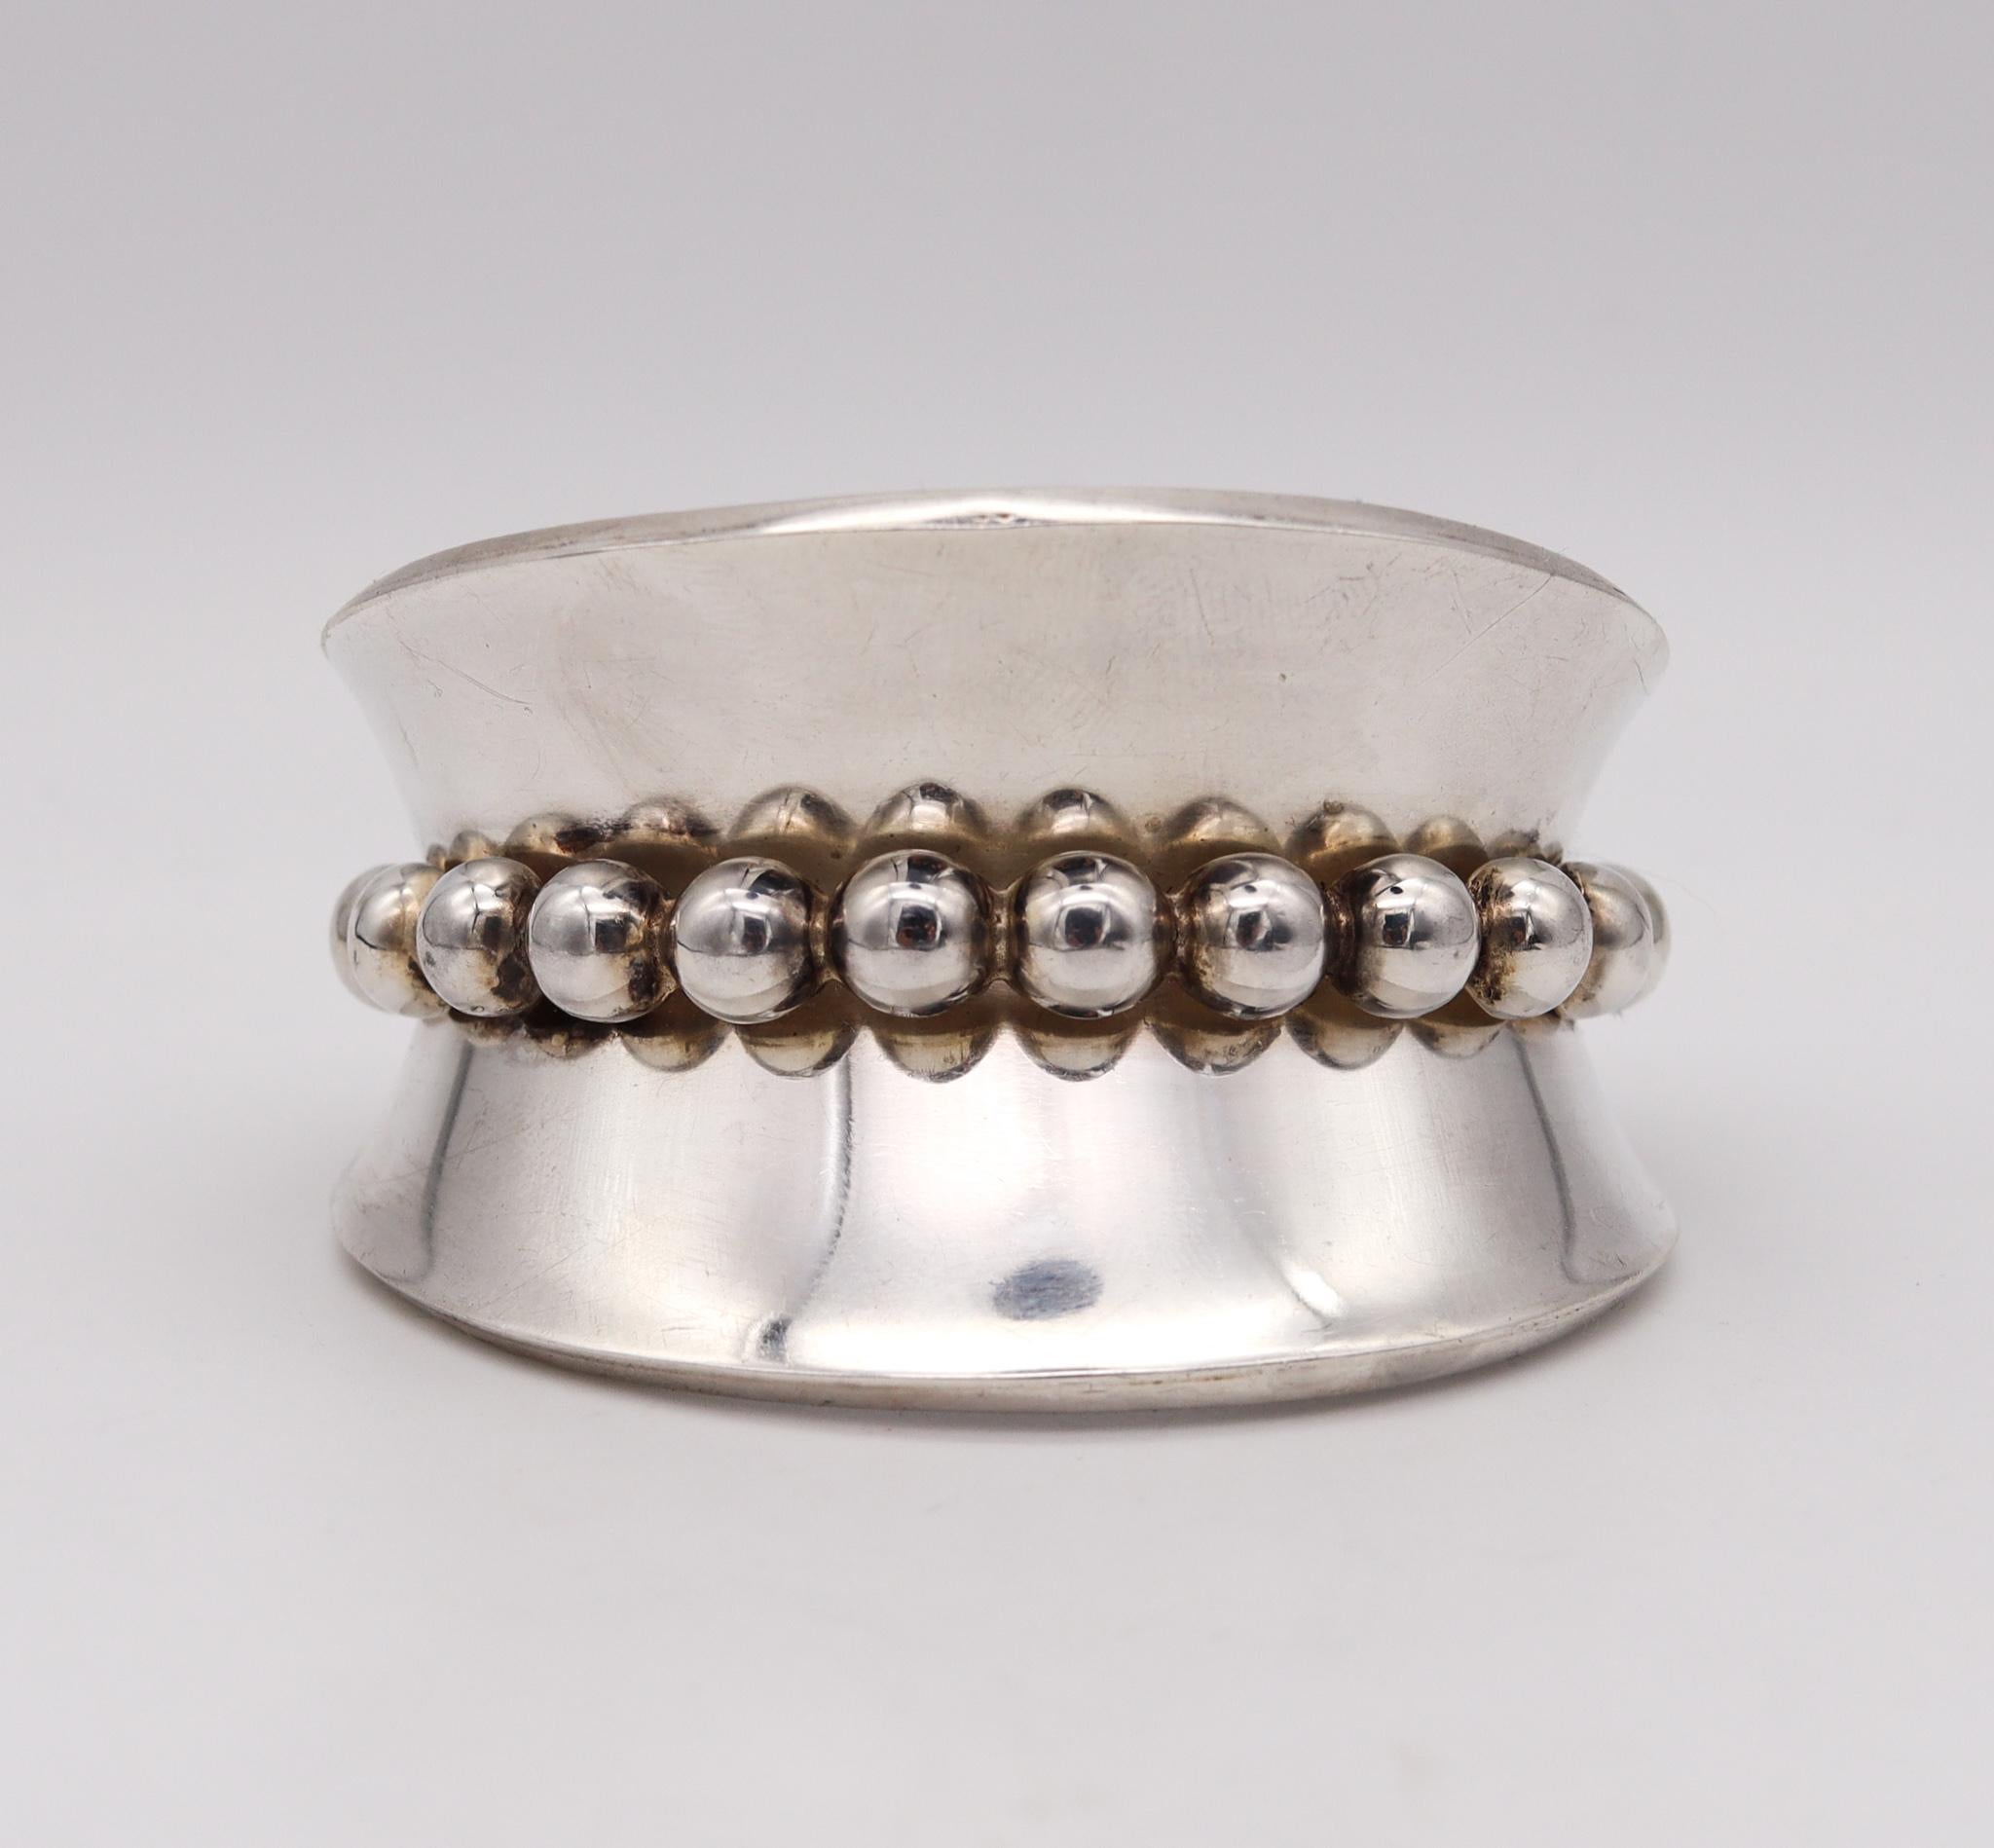 Modernist Mexico 1960 Taxco Geometric Statement Cuff Bracelet In Solid 925 Sterling Silver For Sale